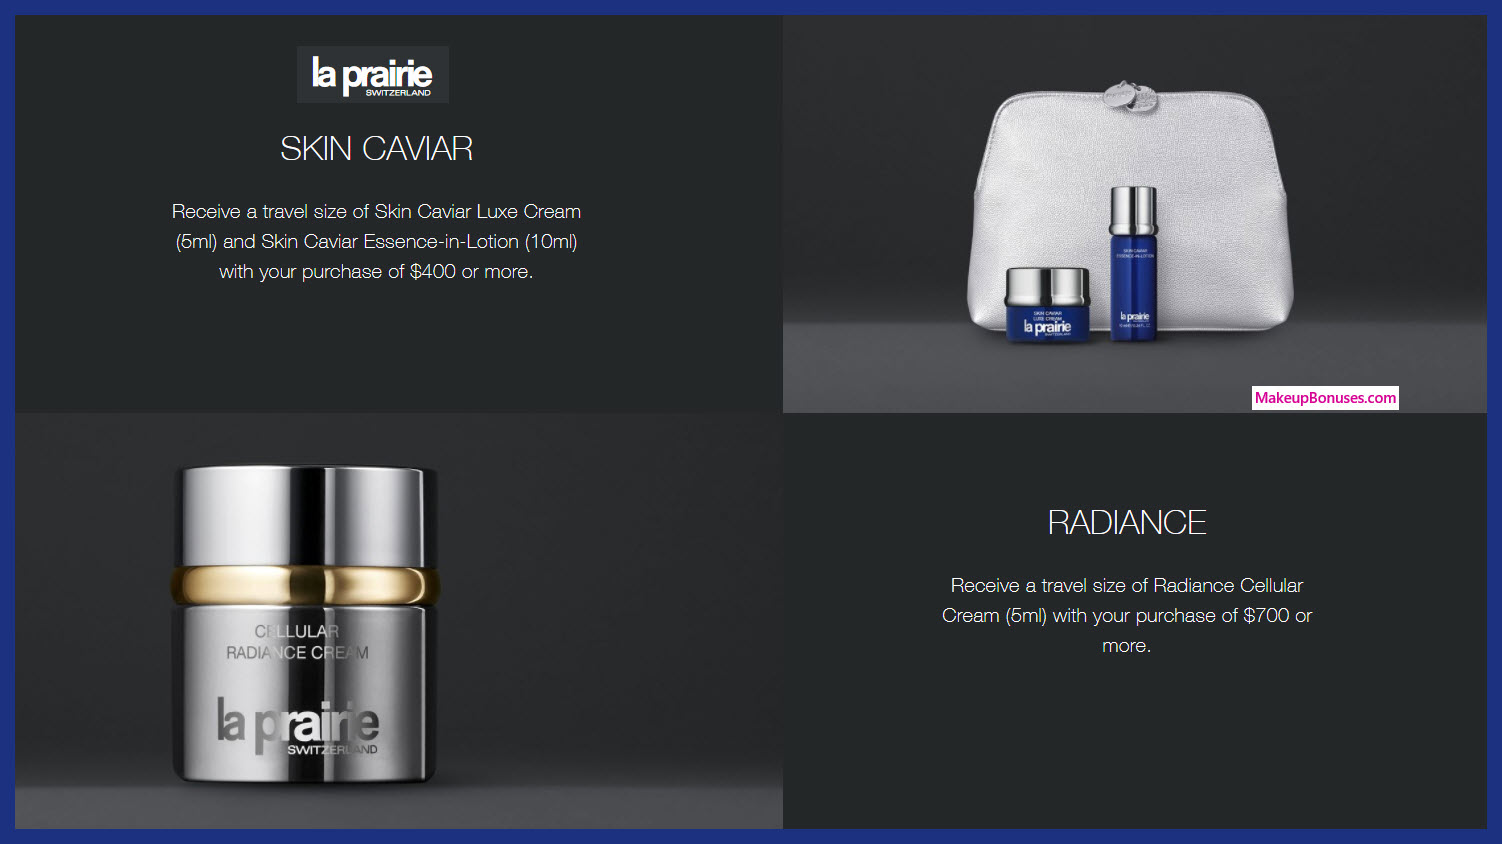 Receive a free 3-pc gift with $400 La Prairie purchase